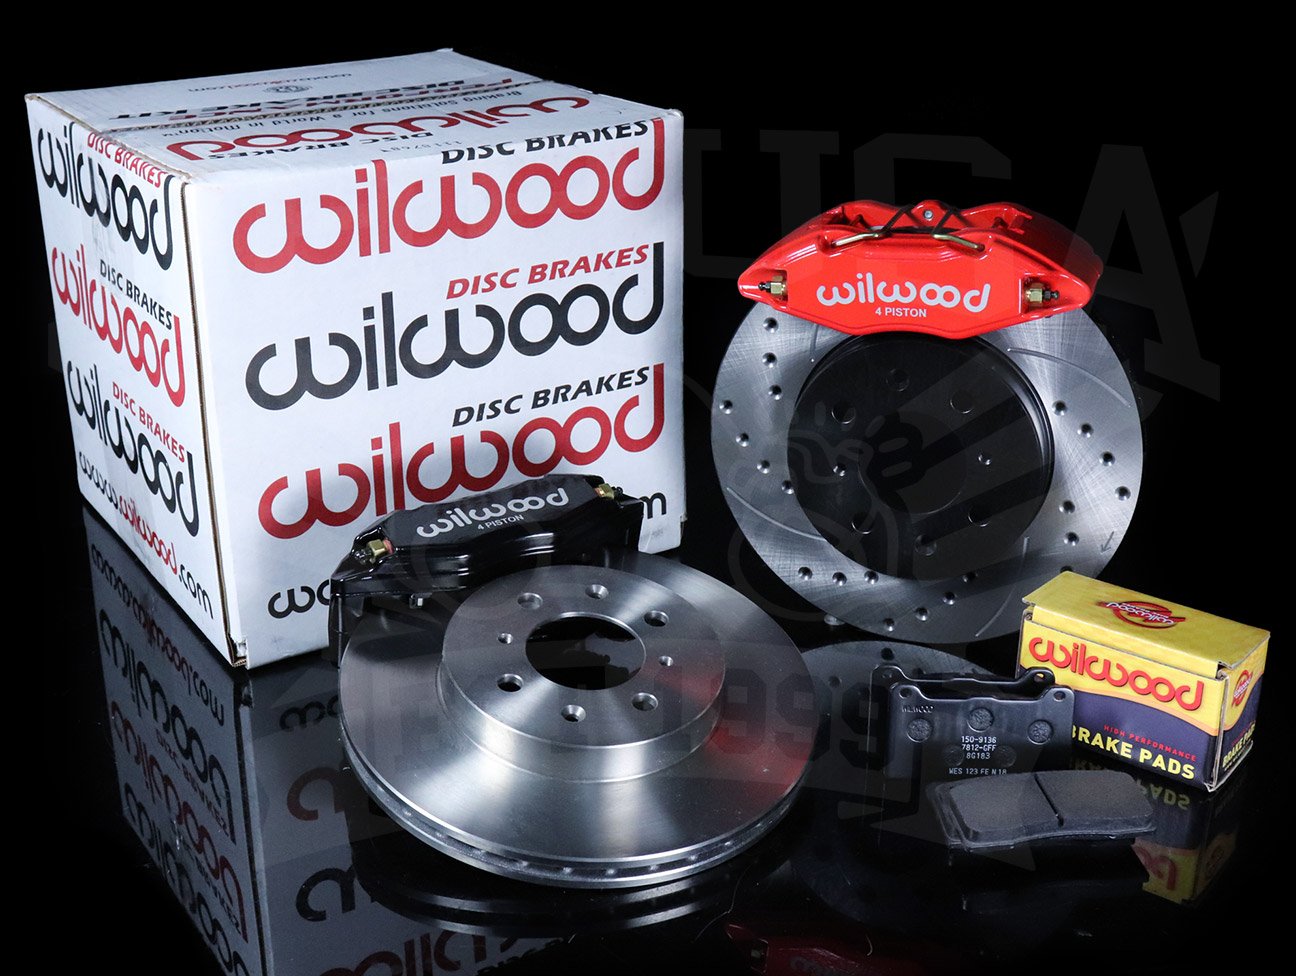 Complete line of Wilwood disc brake Kits and parts